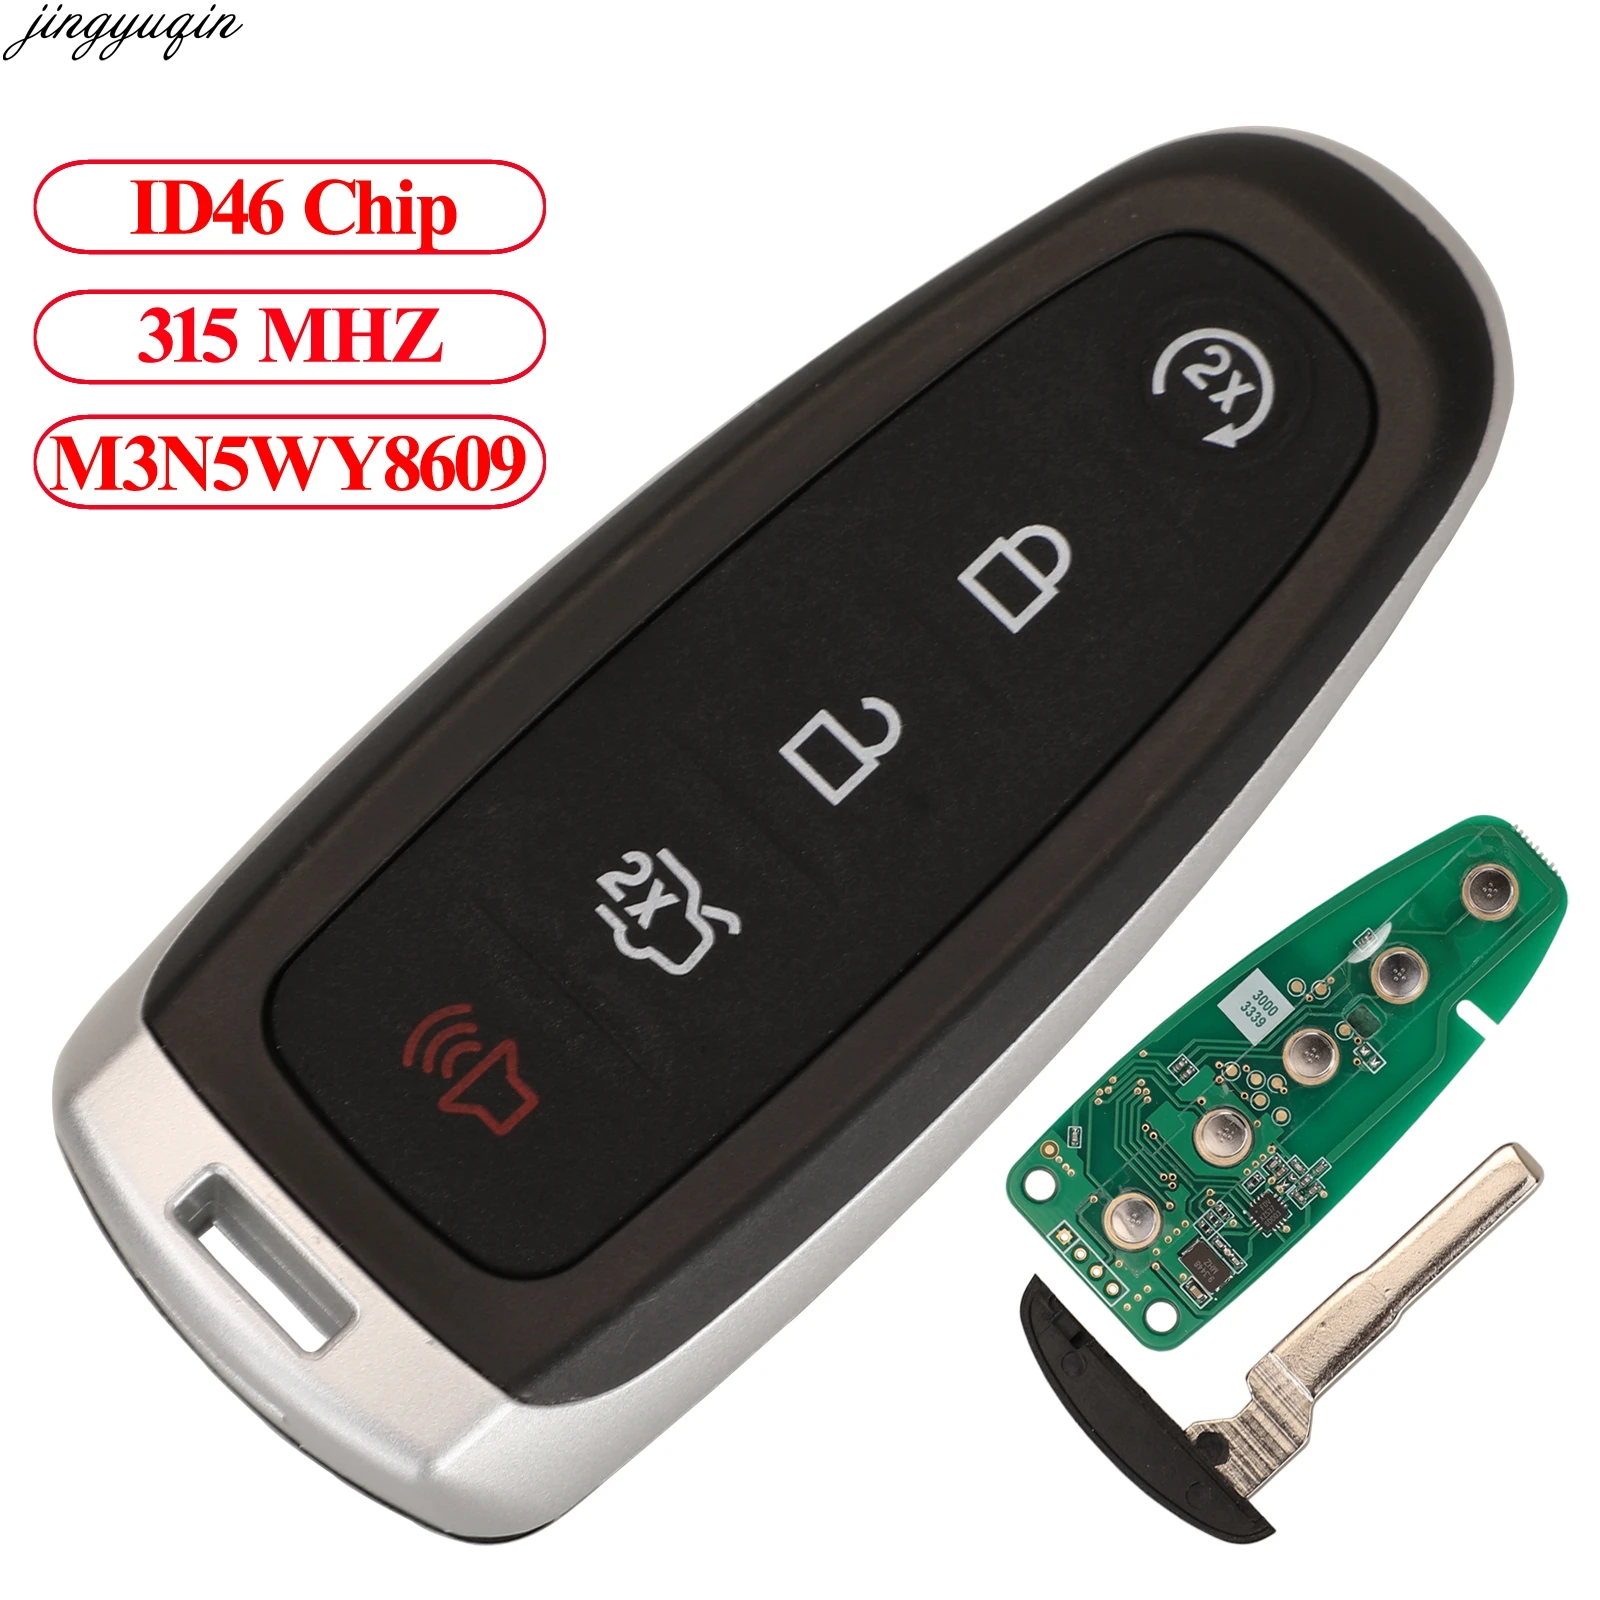 

Jingyuqin Remote Control Car Key ID46 315MHZ For Ford Edge Escape Explore Expedition Flex Focus Taurus M3N5WY8609 5 Buttons